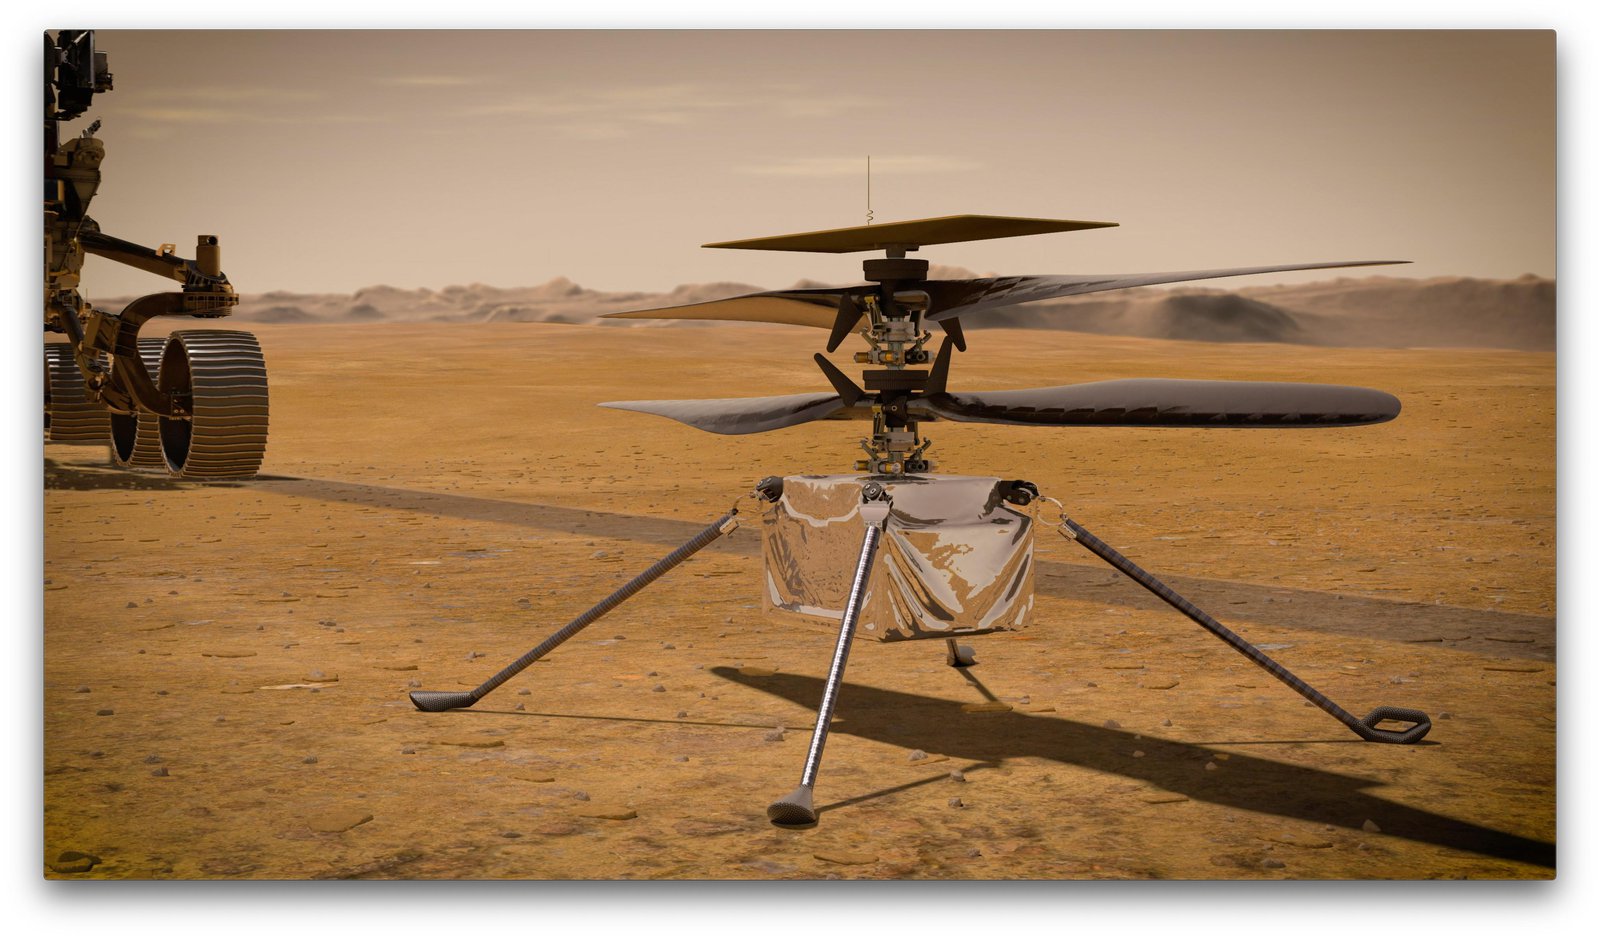 Software Bug Delays Ingenuity Helicopter’s 4th Mars Flight